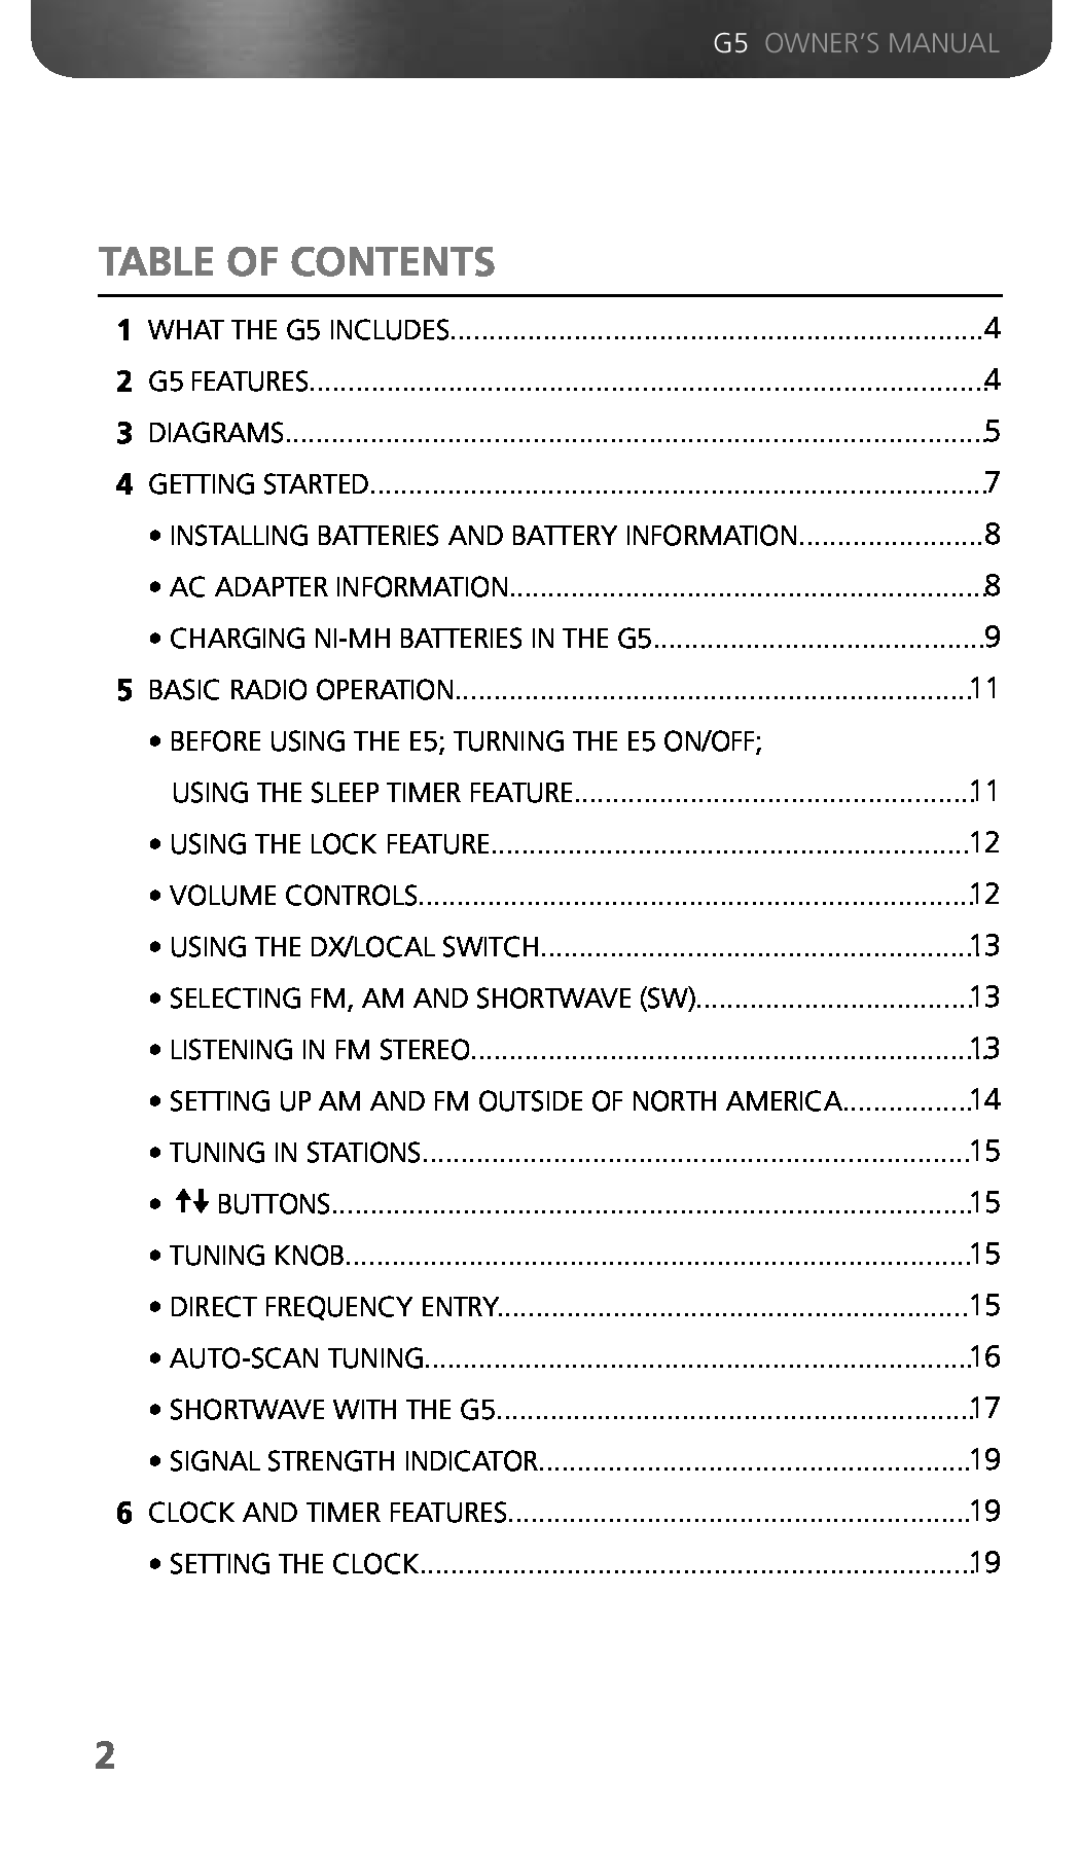 Eton G5 owner manual Table Of Contents, BEFORE USING THE E5 TURNING THE E5 ON/OFF 